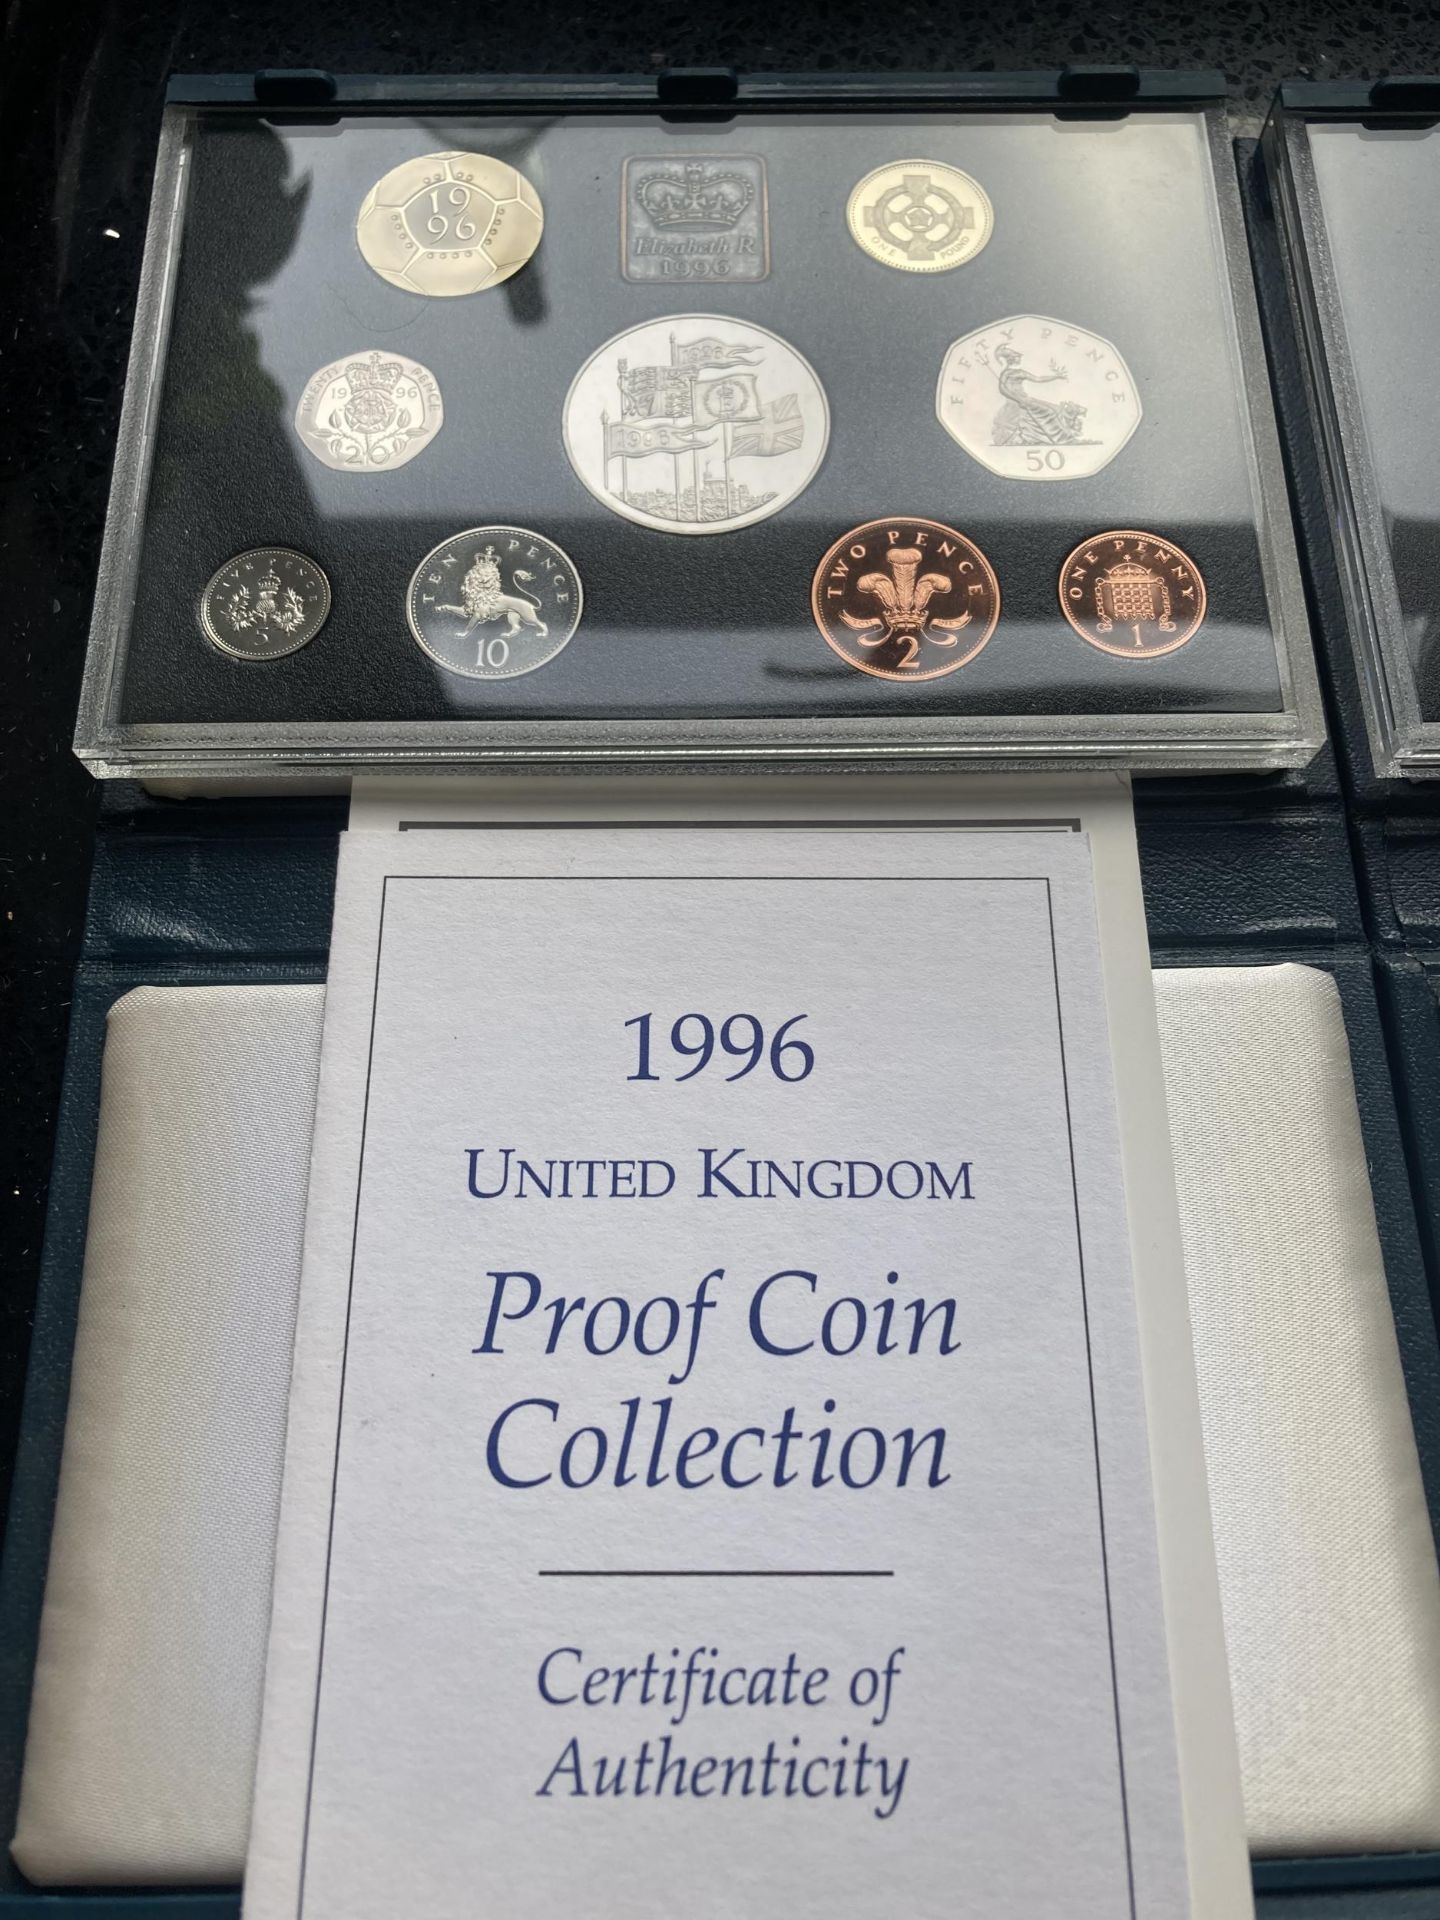 UK CASED COIN SETS FOR 1995 AND 1996 EACH WITH COA - Image 2 of 3